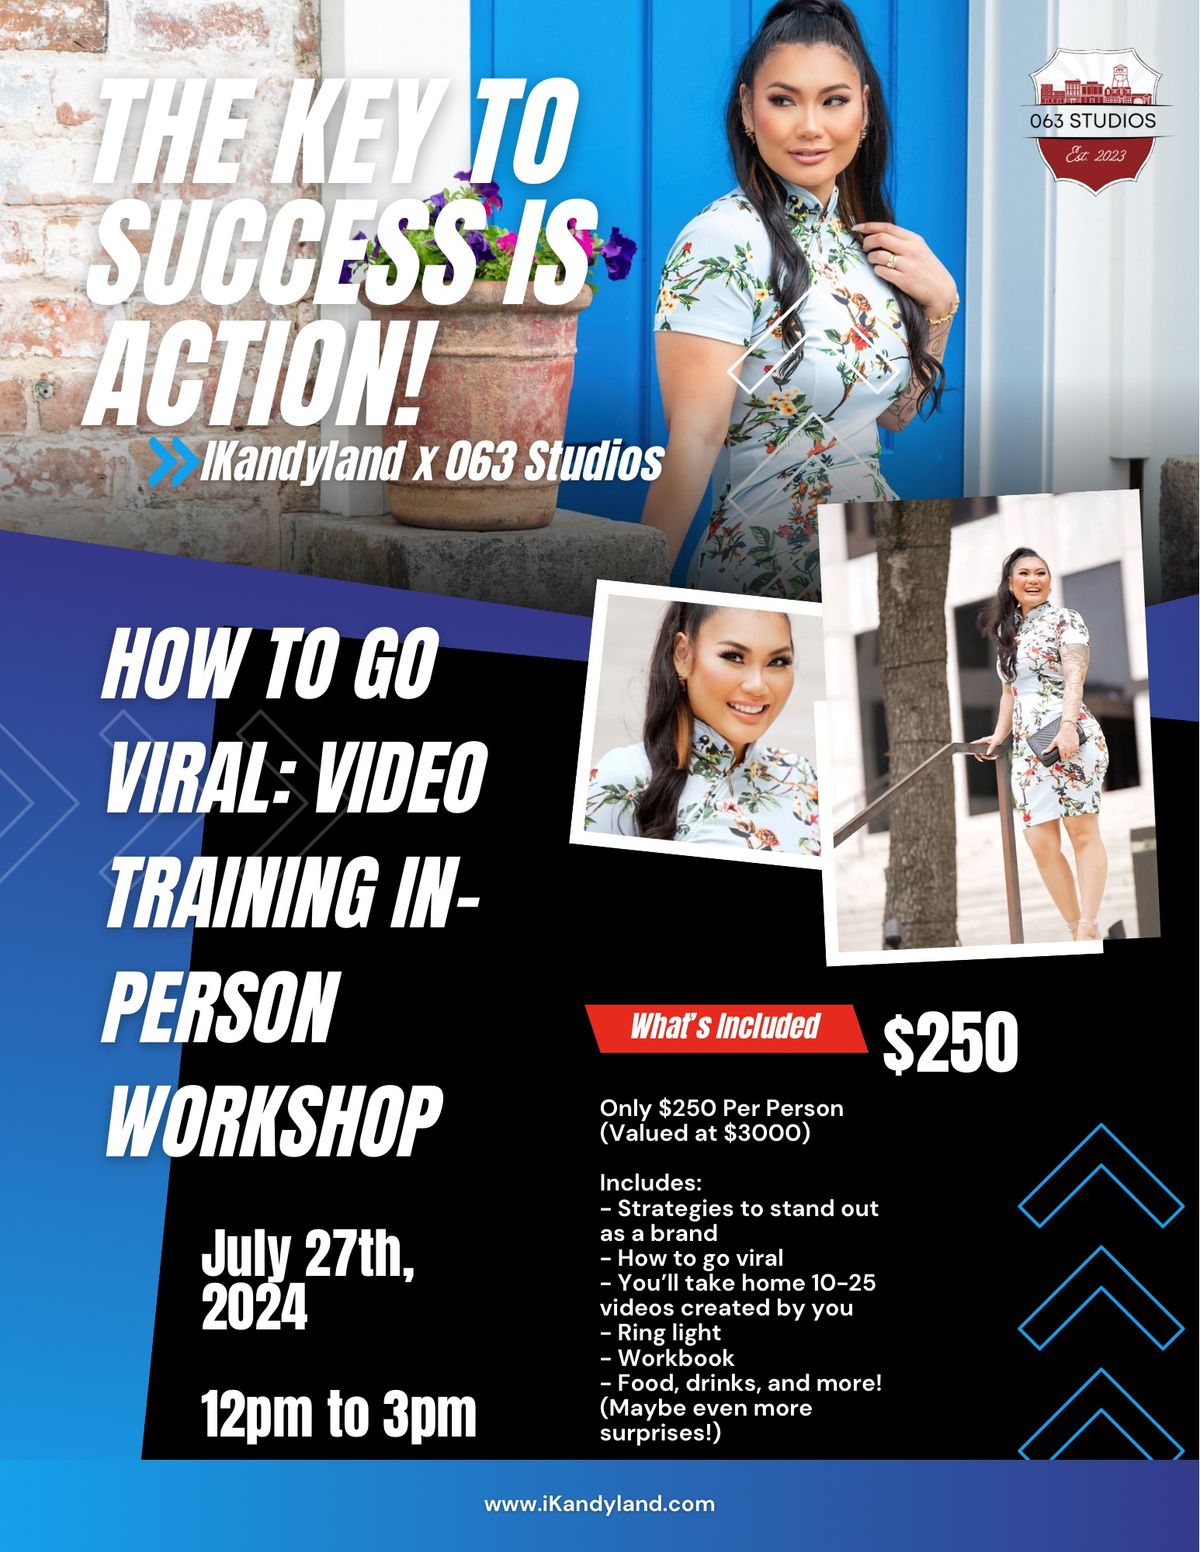 How to Go Viral: Video Training In-Person Workshop